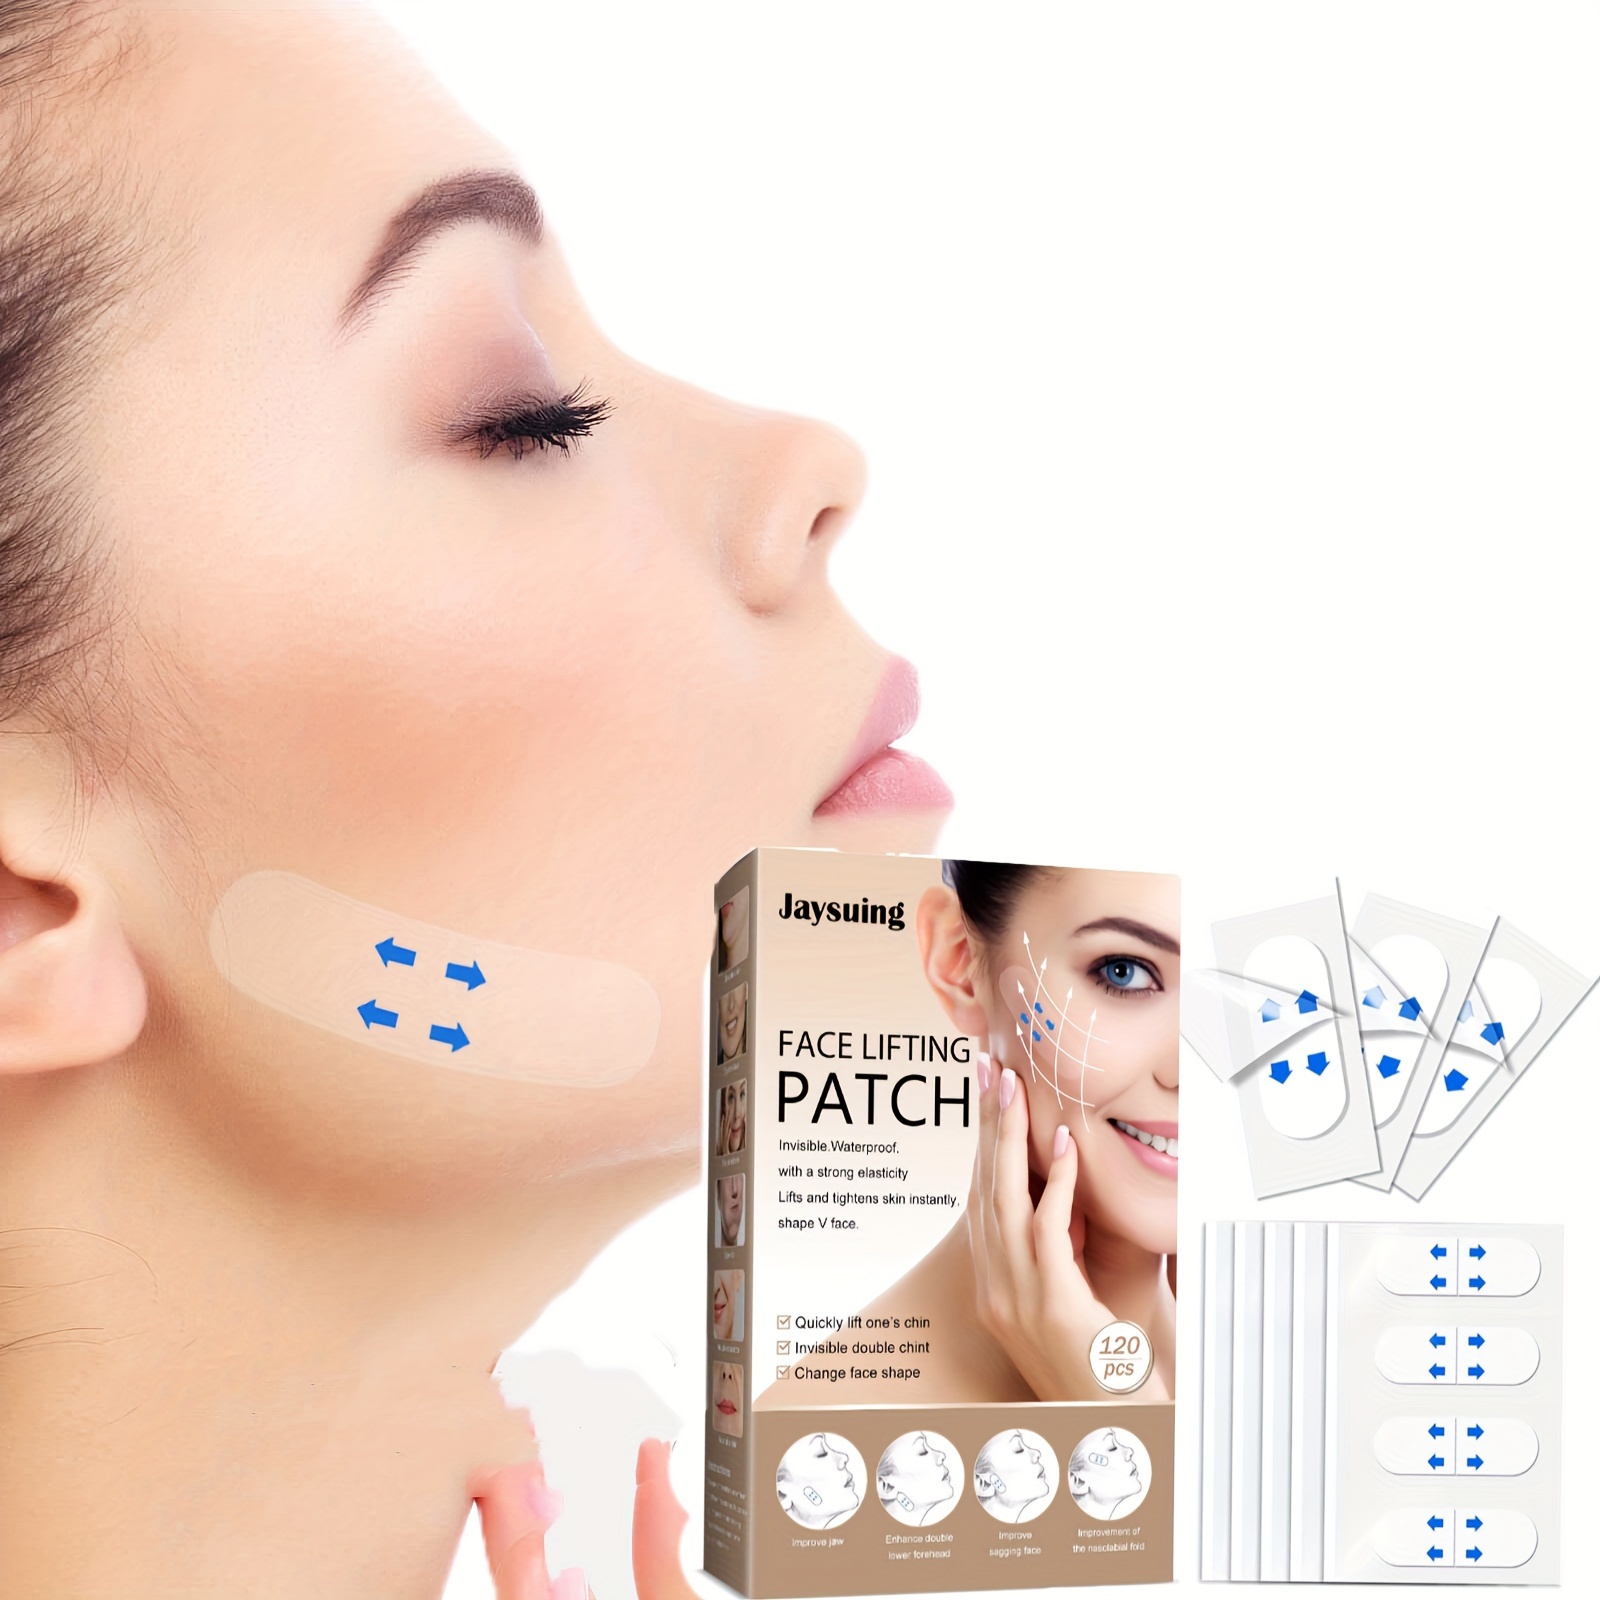 Buy Face Lift Sticker, 40Pcs/Set Instant Invisible V-Shaped Face Lift Tape  for Skin Tightening Makeup Chin Lift Tools Online - Shop Health & Fitness on  Carrefour UAE